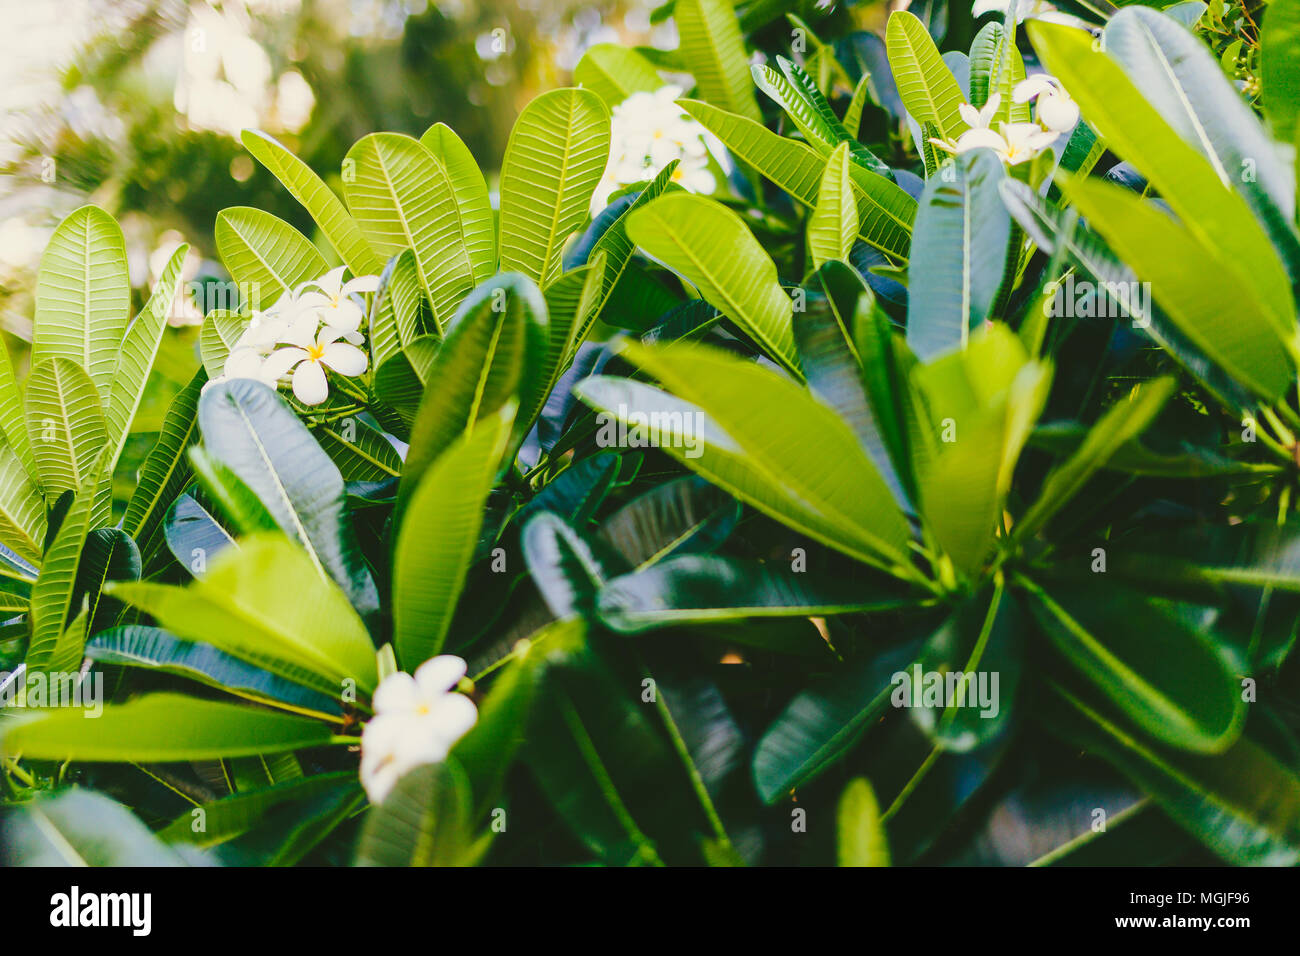 frangipani plants with vibrant colors and flowers in subtropical climate, shot in Queensland Australia Stock Photo